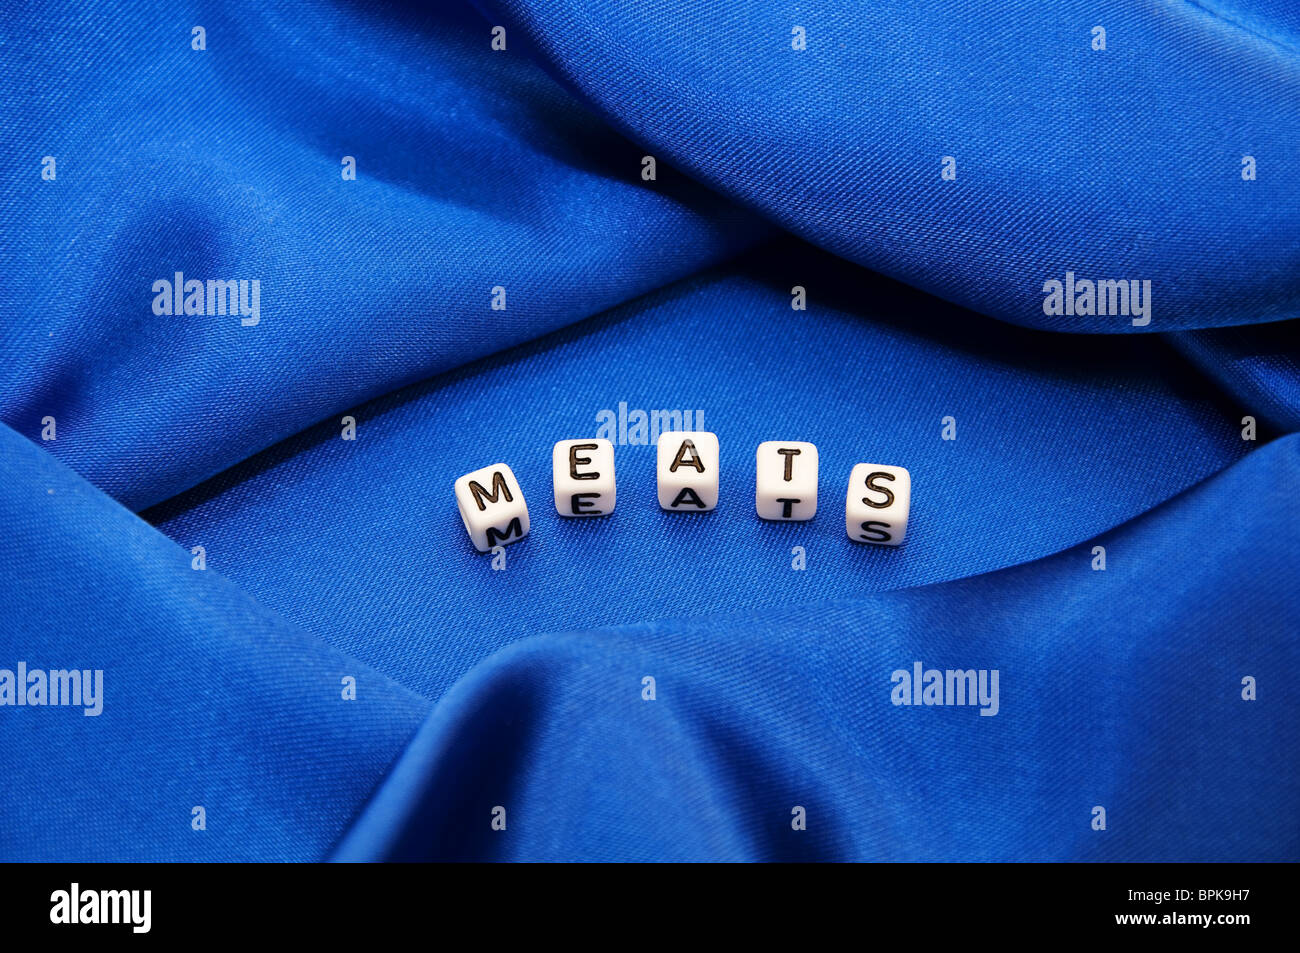 Royal blue satin background with rich folds and wrinkles for texture is the word Meats in black and white cube lettering series. Stock Photo